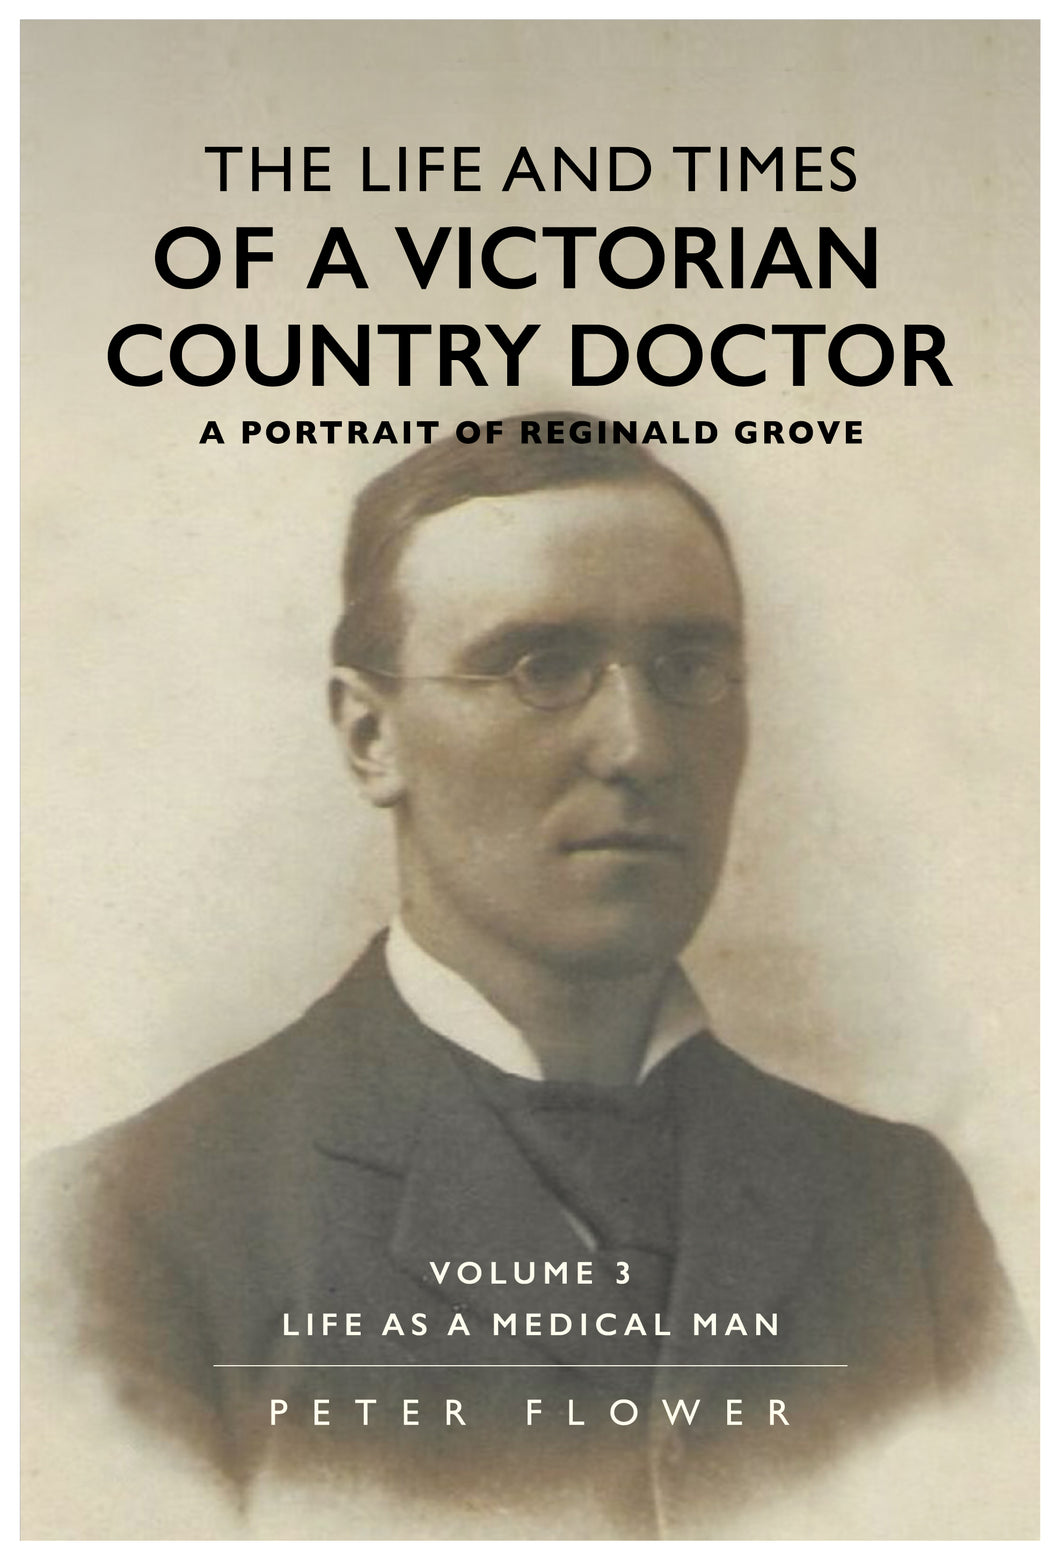 The Life and Times Of A Victorian Country Doctor - A Portrait of Reginald Grove Volume 3; Life As A Medical Man - Peter Flower